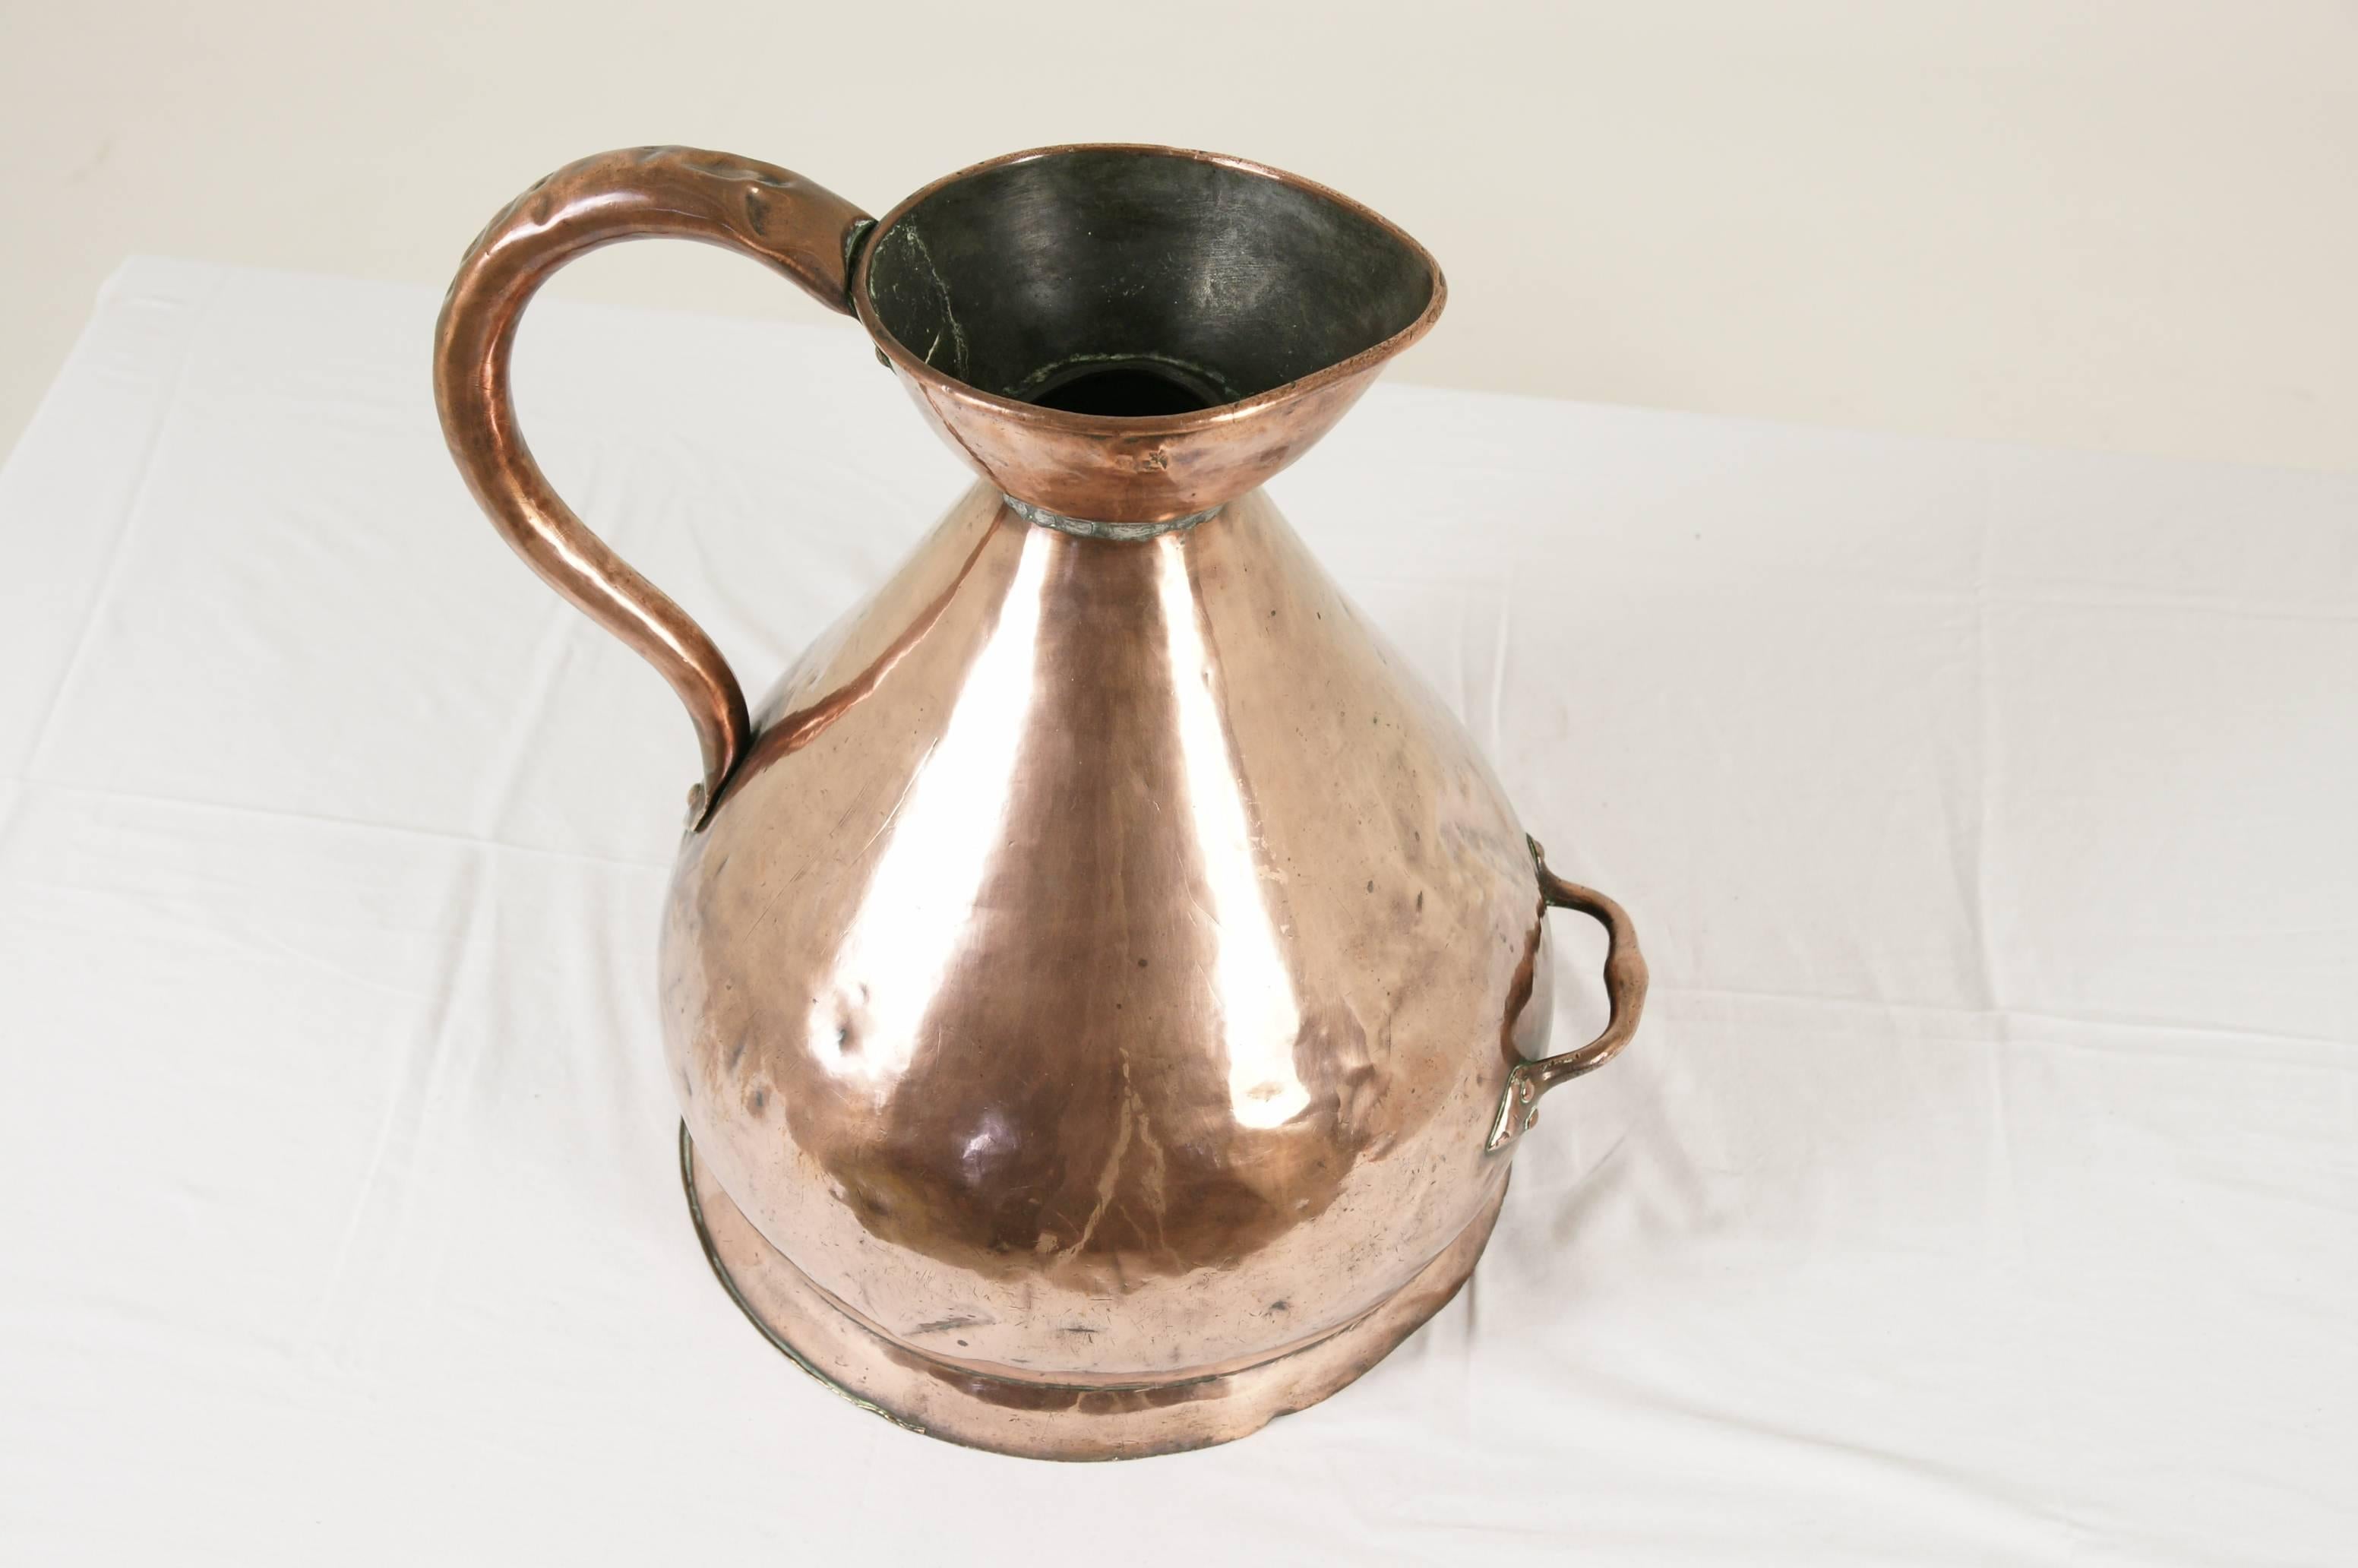 Scotland, 1880.
All original.
Haystack shape.
Wide rounded body.
Shaped pouring spout.
Loop handle.
Has pressed seal mark on inside lip.
Dents and repairs as shown.

$750.

Lot B-202.
Measures: 16